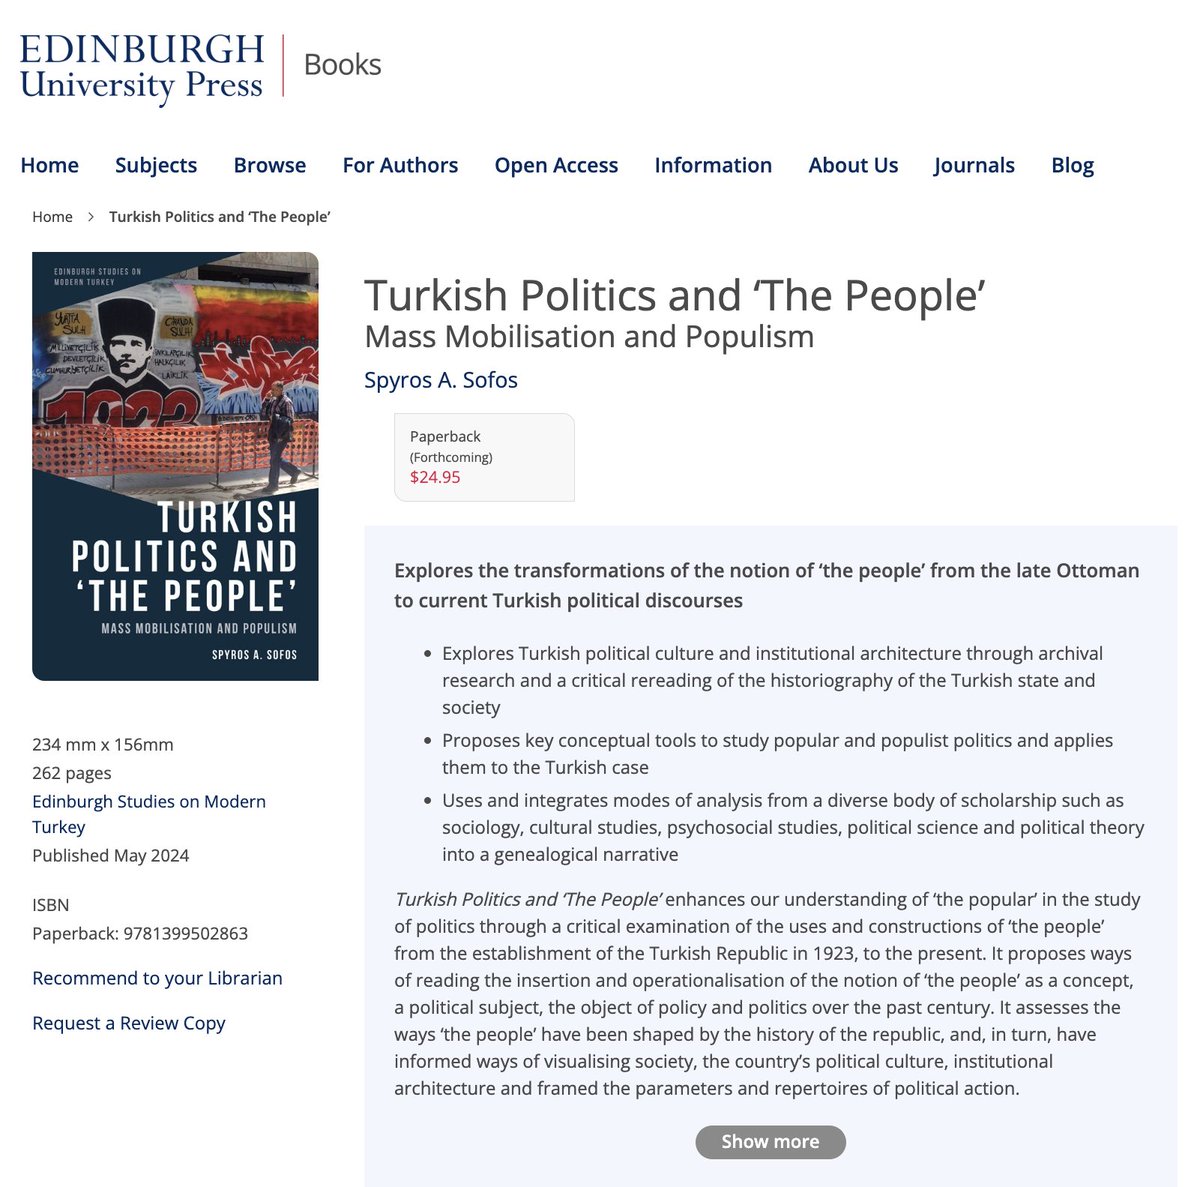 The paperback edition of my book 'Turkish Politics and 'The People': Mass Mobilisation and Populism' is set to hit the shelves soon. This book is a must-read for anyone interested in understanding the politics of Turkey edinburghuniversitypress.com/book-turkish-p…